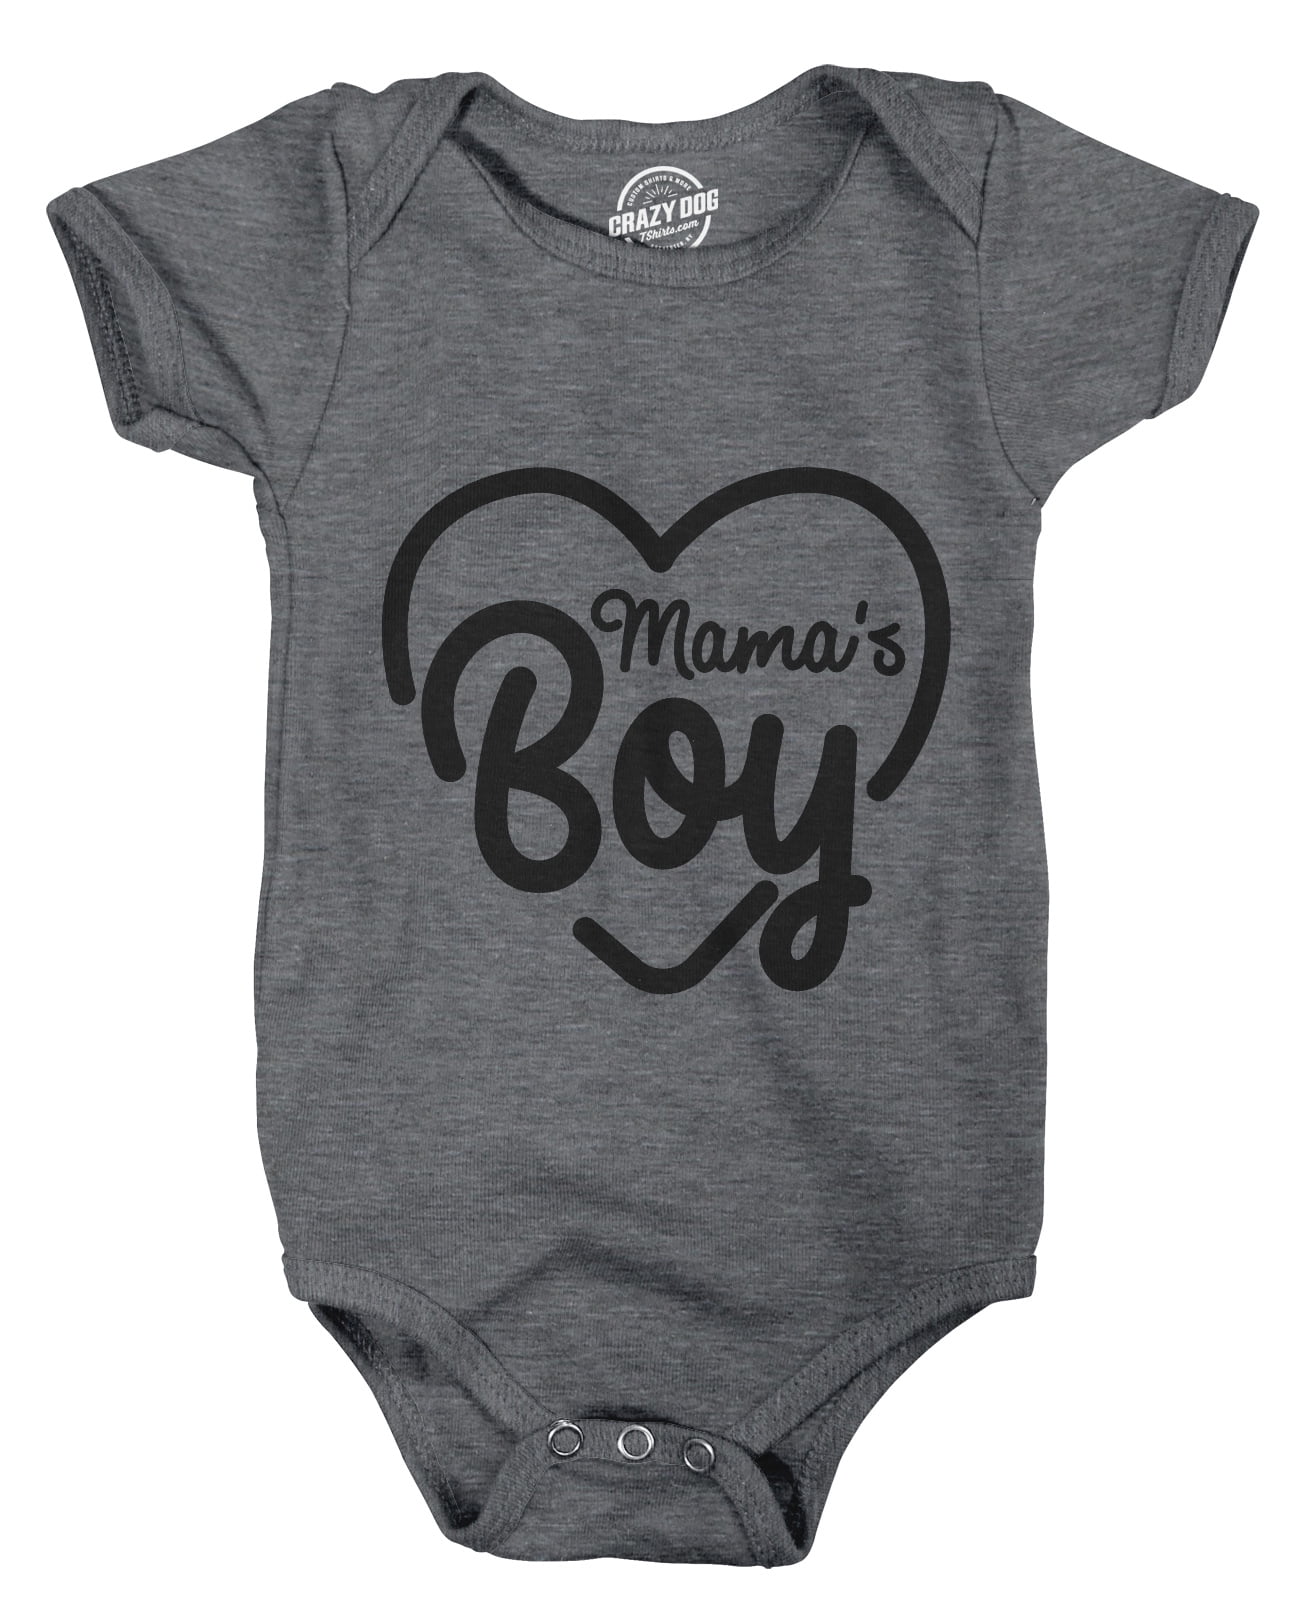 Little Royaltee Details about   HOT MESS Cute Baby Bodysuits and Kids Shirts 